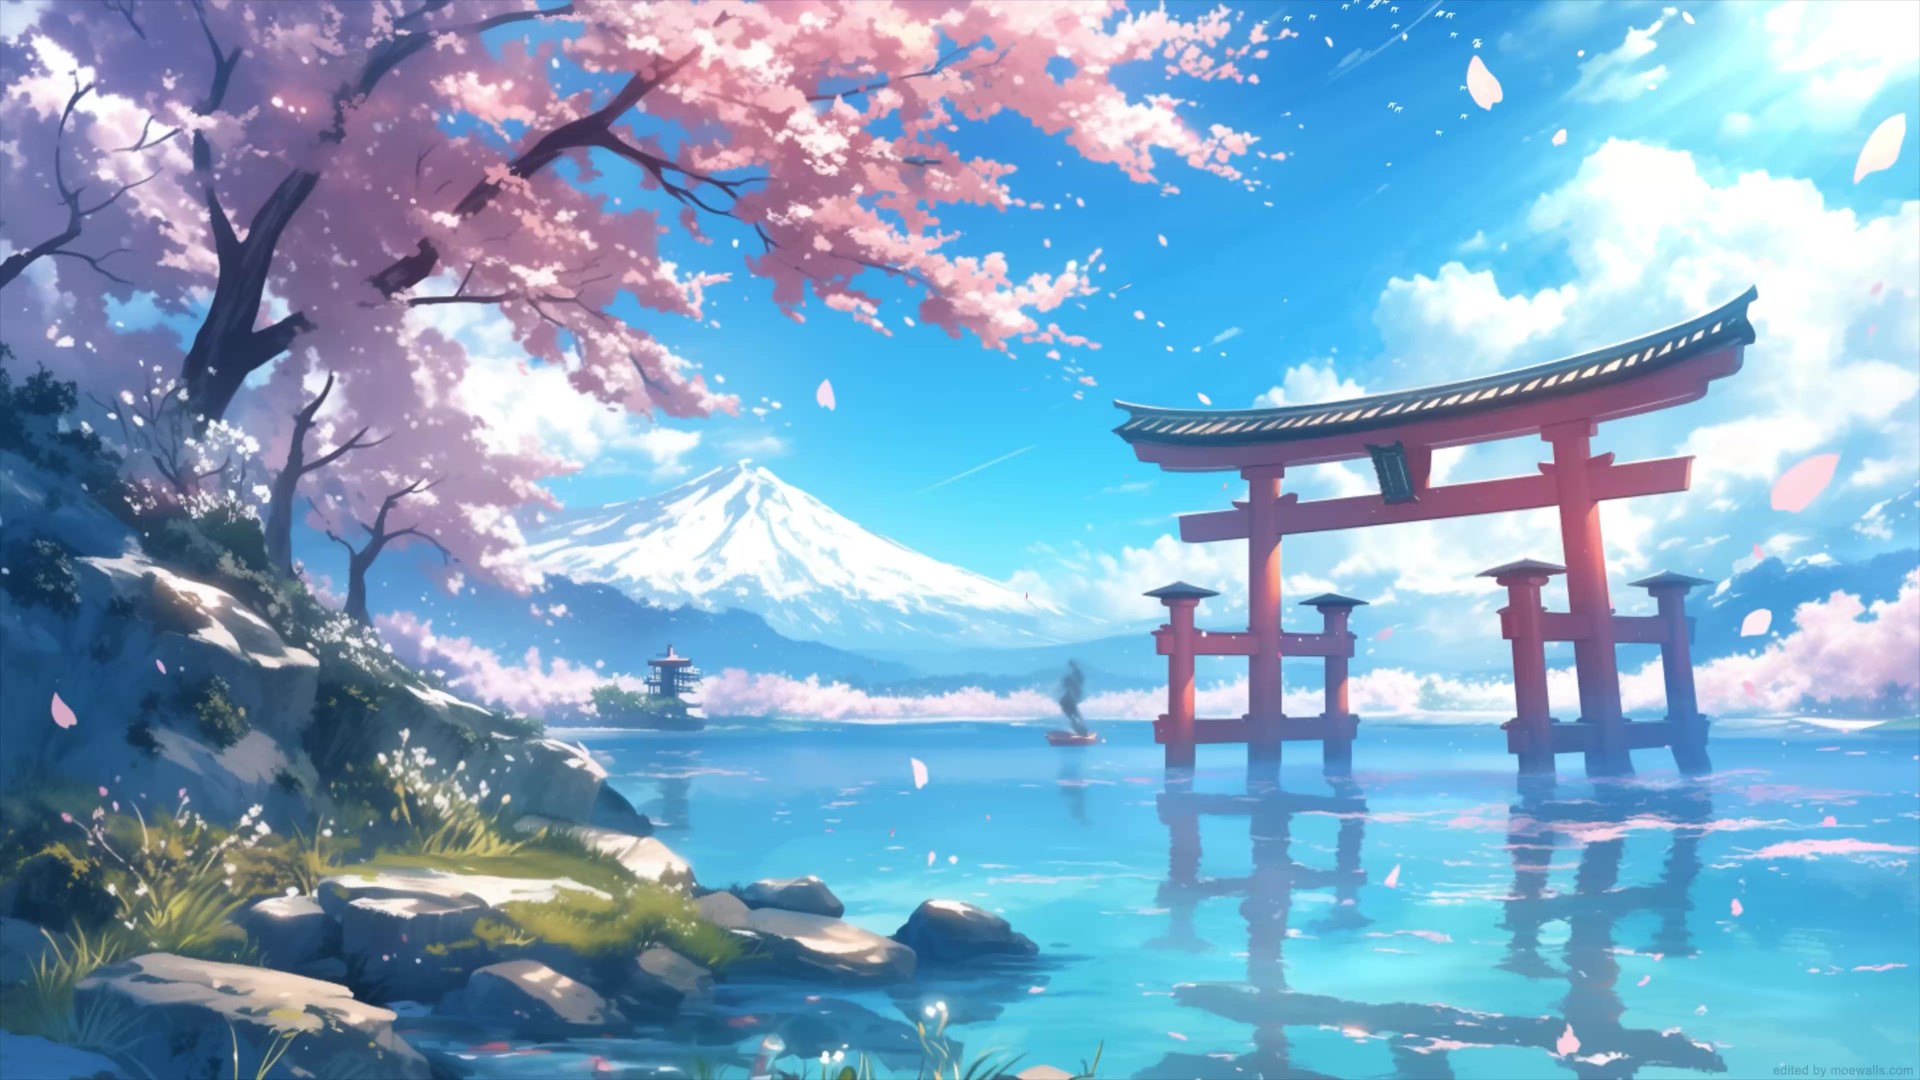 100+] Beautiful Anime Scenery Wallpapers | Wallpapers.com